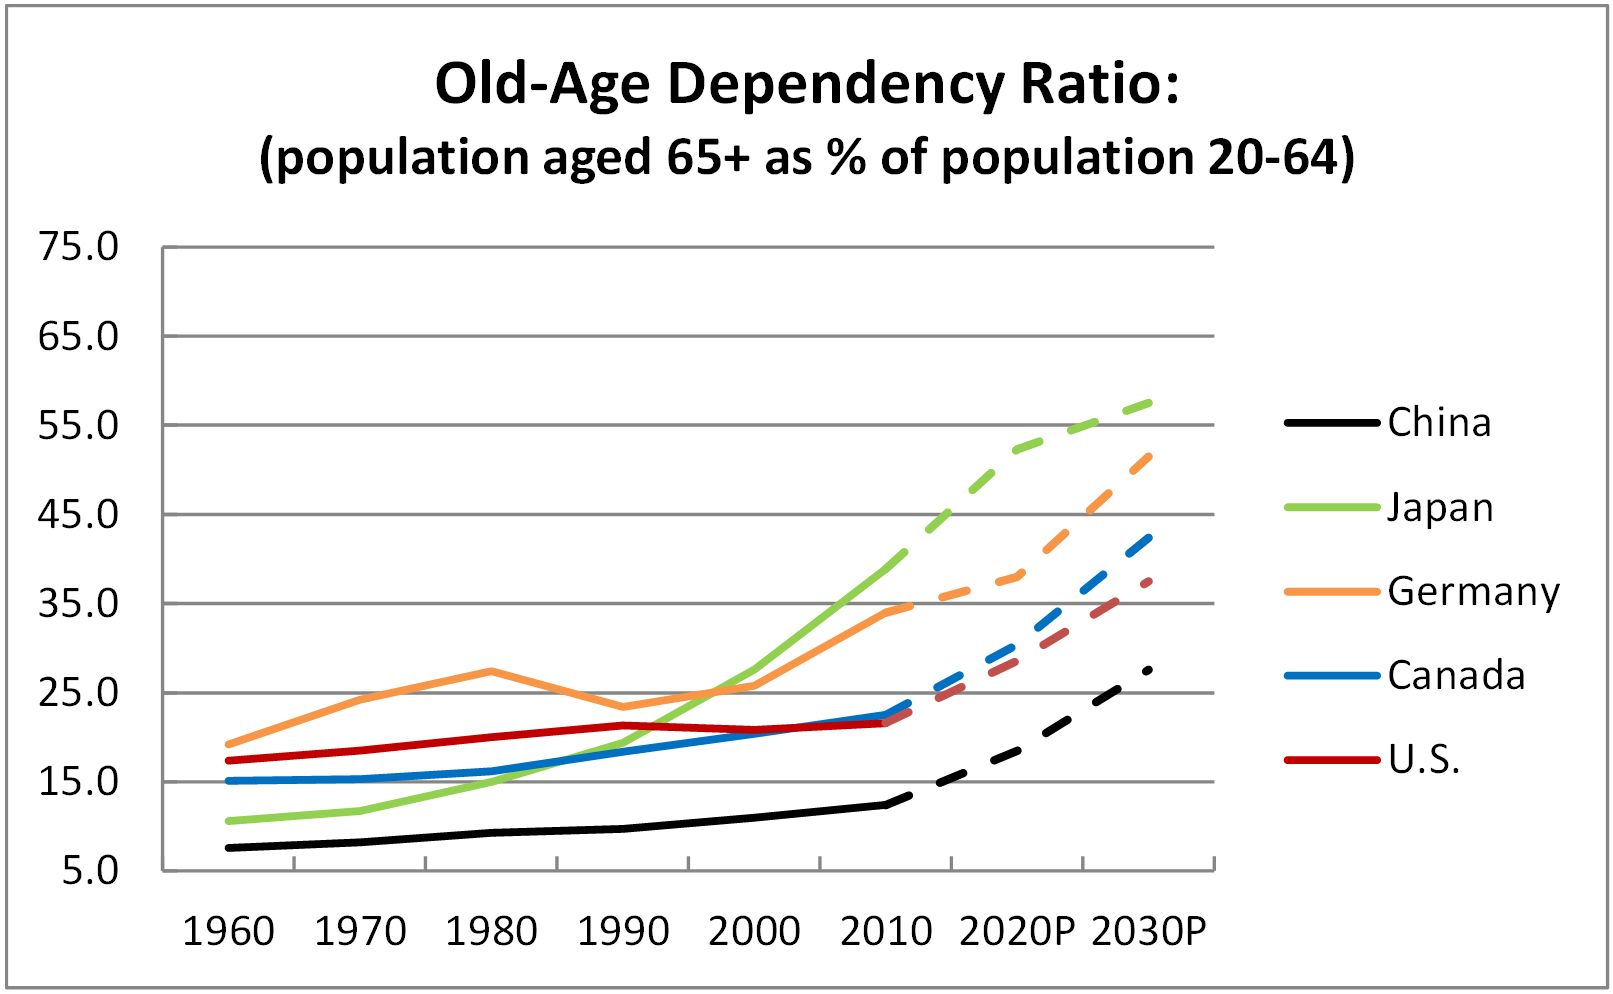 Chart 2.1 - Old-age Dependency Ratio